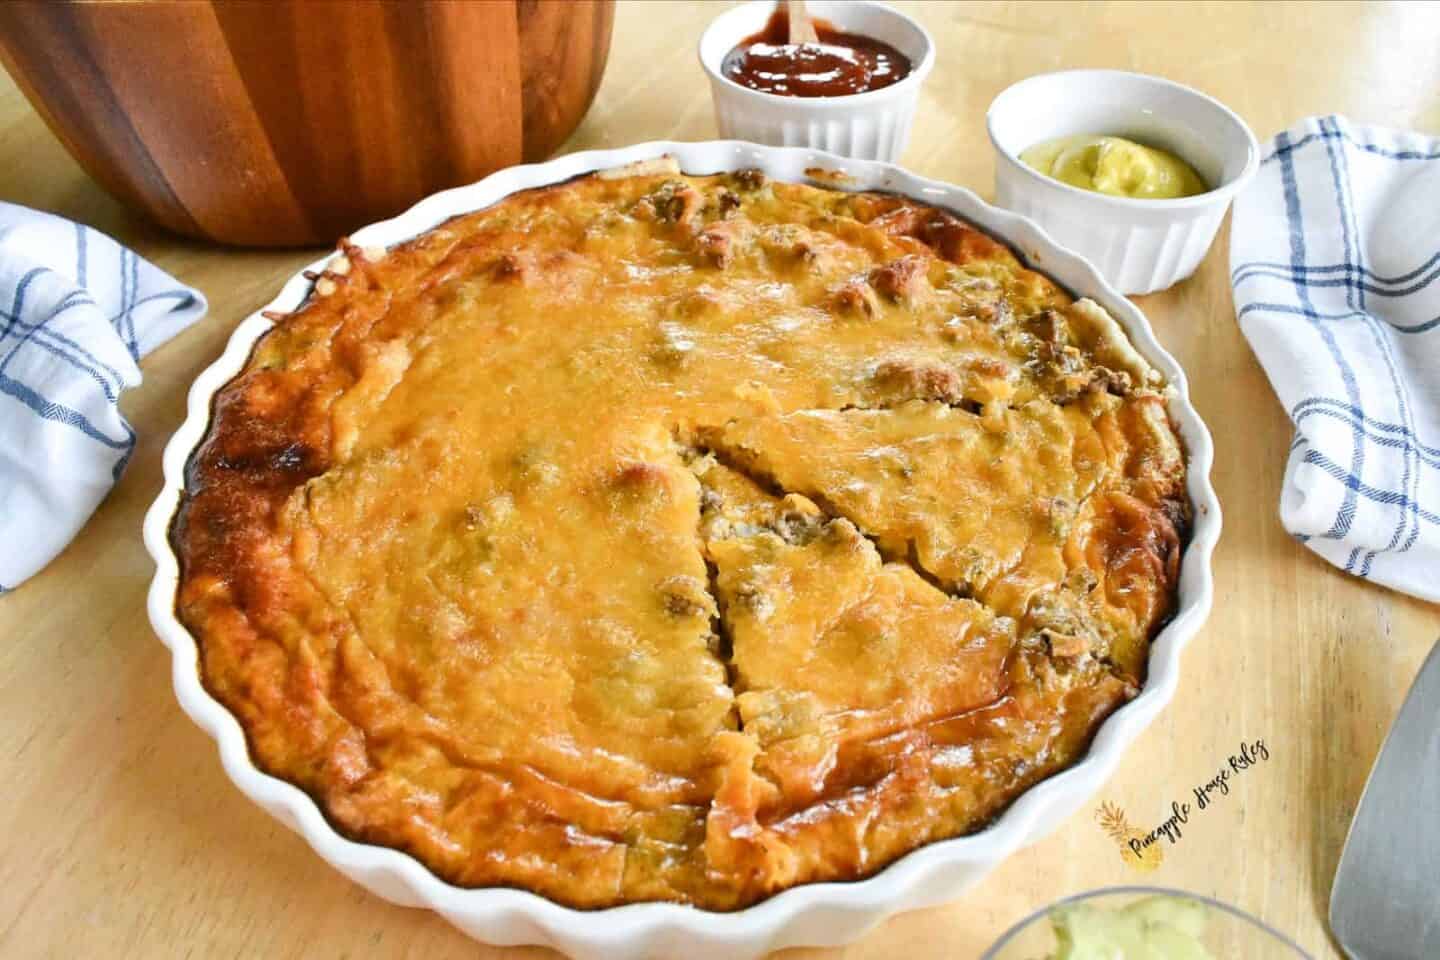 Cheeseburger Quiche is a savory, delicious spin on a traditional quiche mixed with the flavors of a good old fashioned cheeseburger.